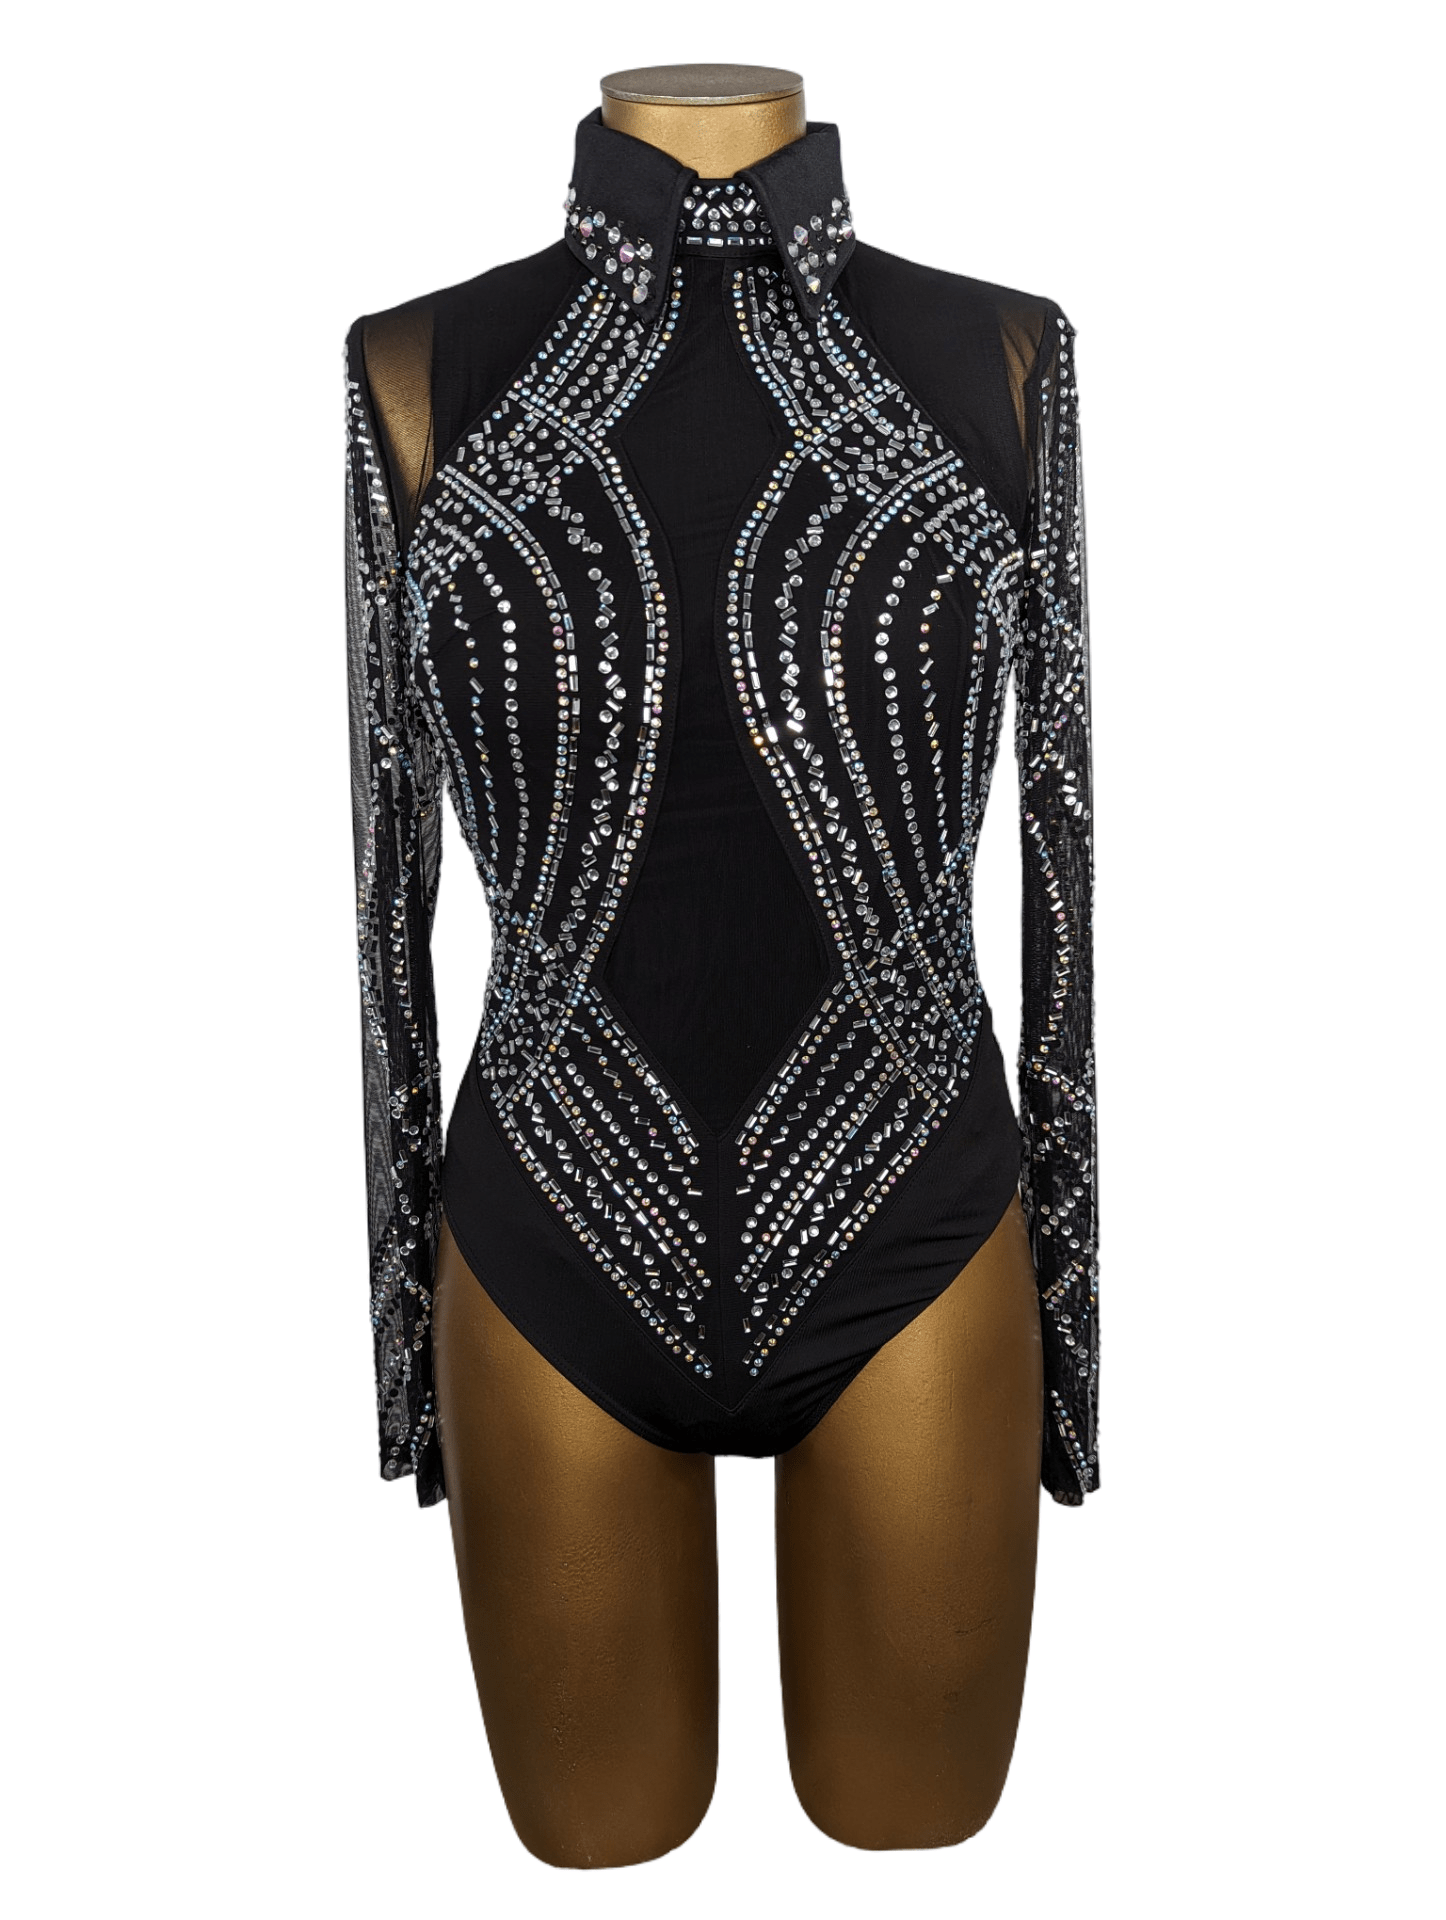 sparkle-ridge-womens-western-wear-affordable-show-clothes-horse-shirts-with-bling-rodeo-bodysuit-black-aces-front.png (Copy)